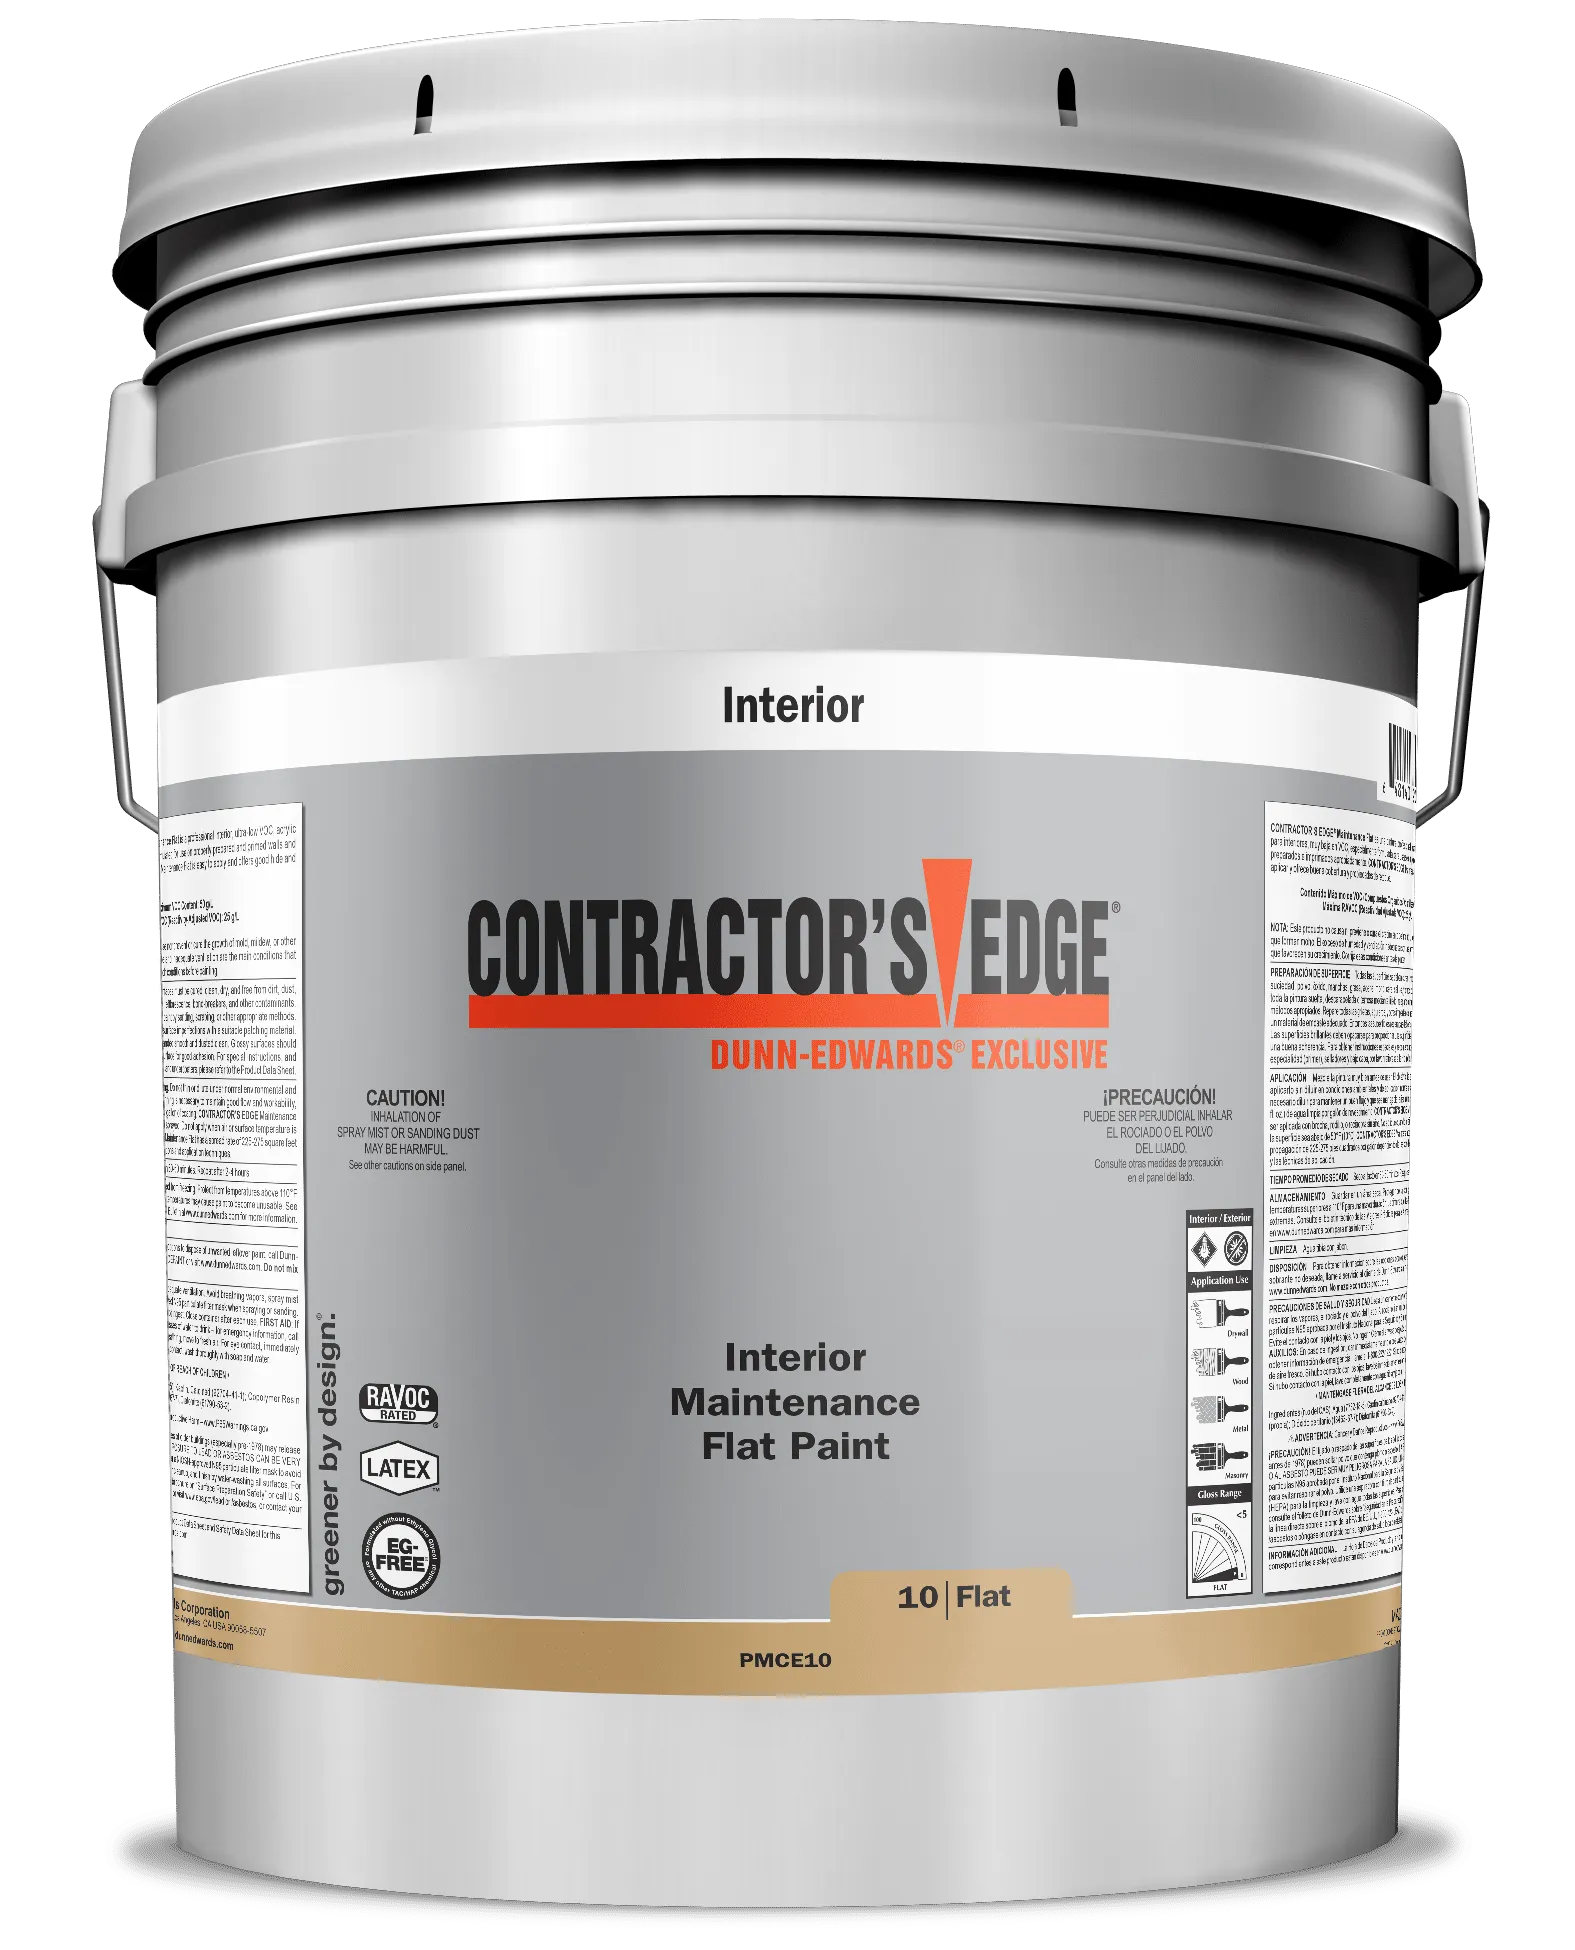 CONTRACTOR’S EDGE Interior Maintenance Flat Paint Can